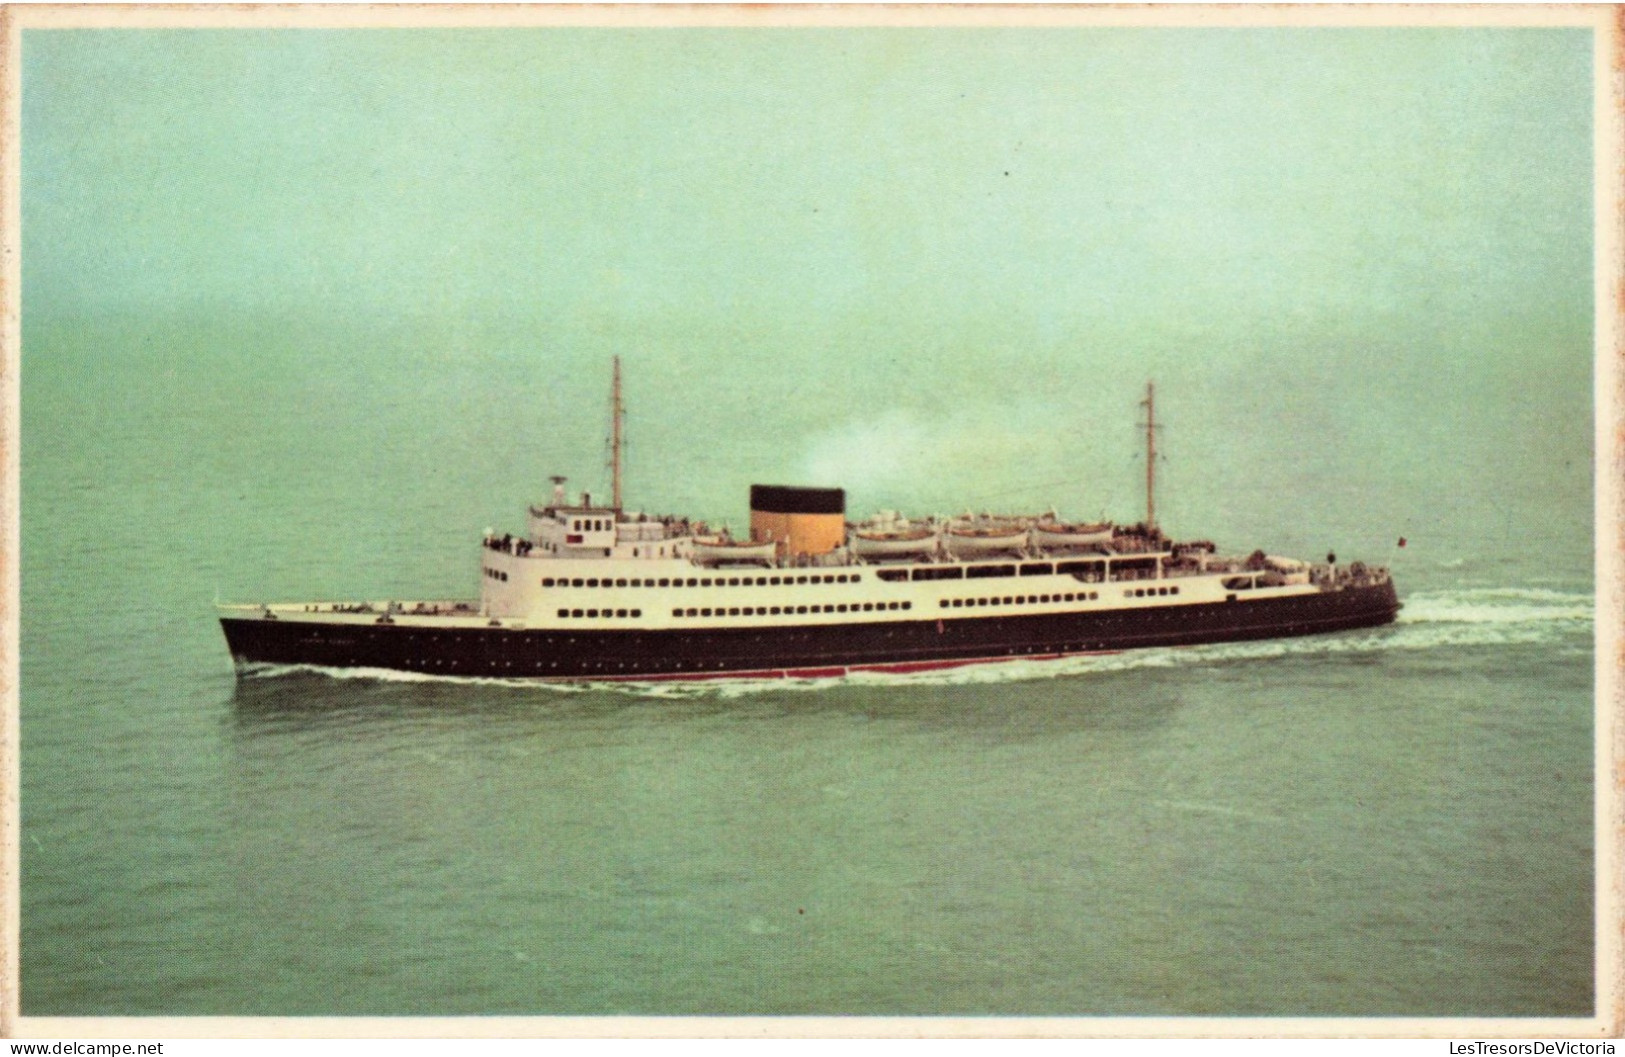 TRANSPORTS - Bateaux - Vulcania - Dover-Ostend Line - Koning Albert - Carte Postale Ancienne - Paquebote